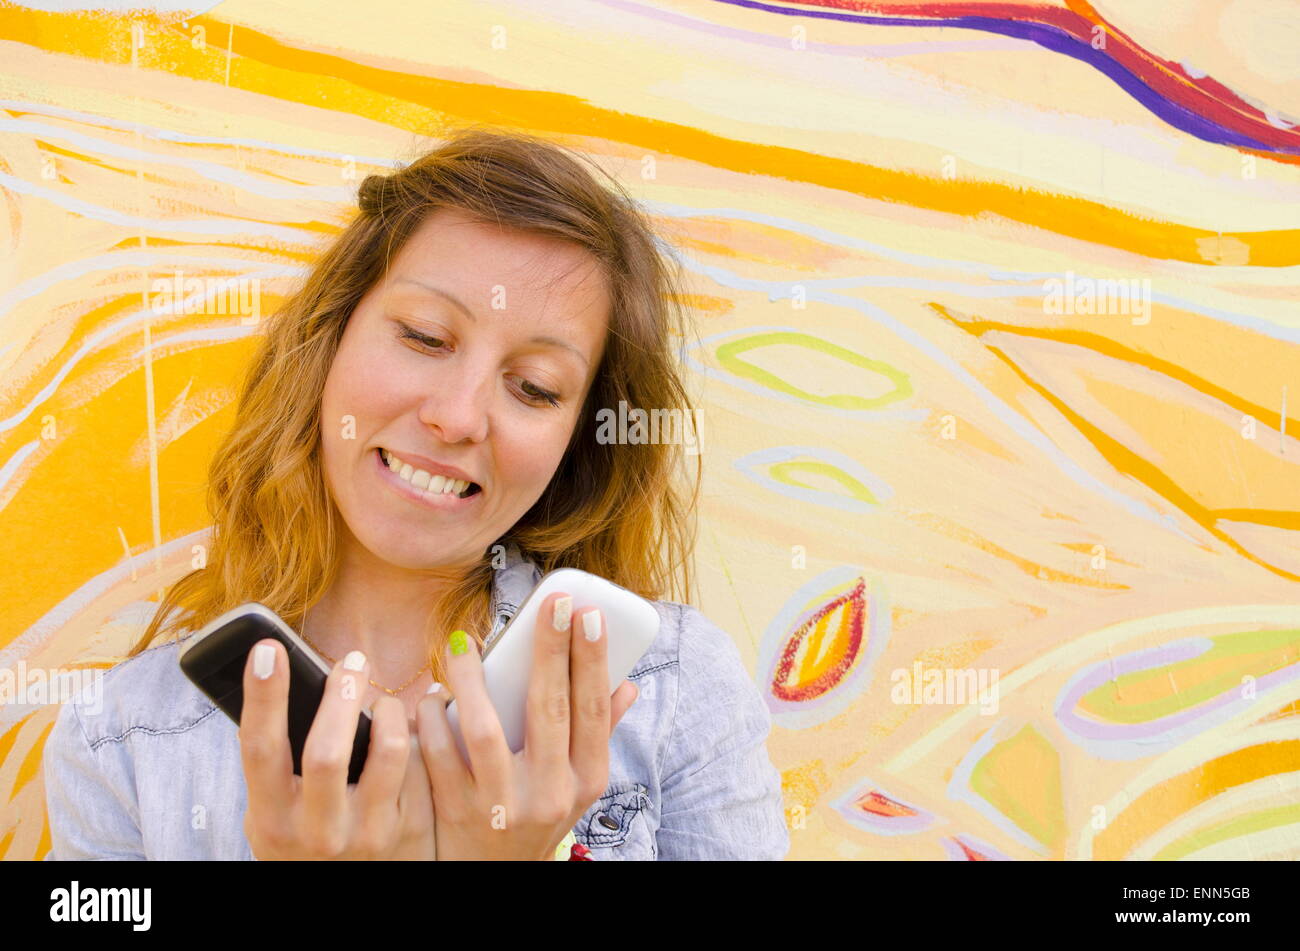 Happy girl looking at two smart phones against a colorful backdrop Stock Photo